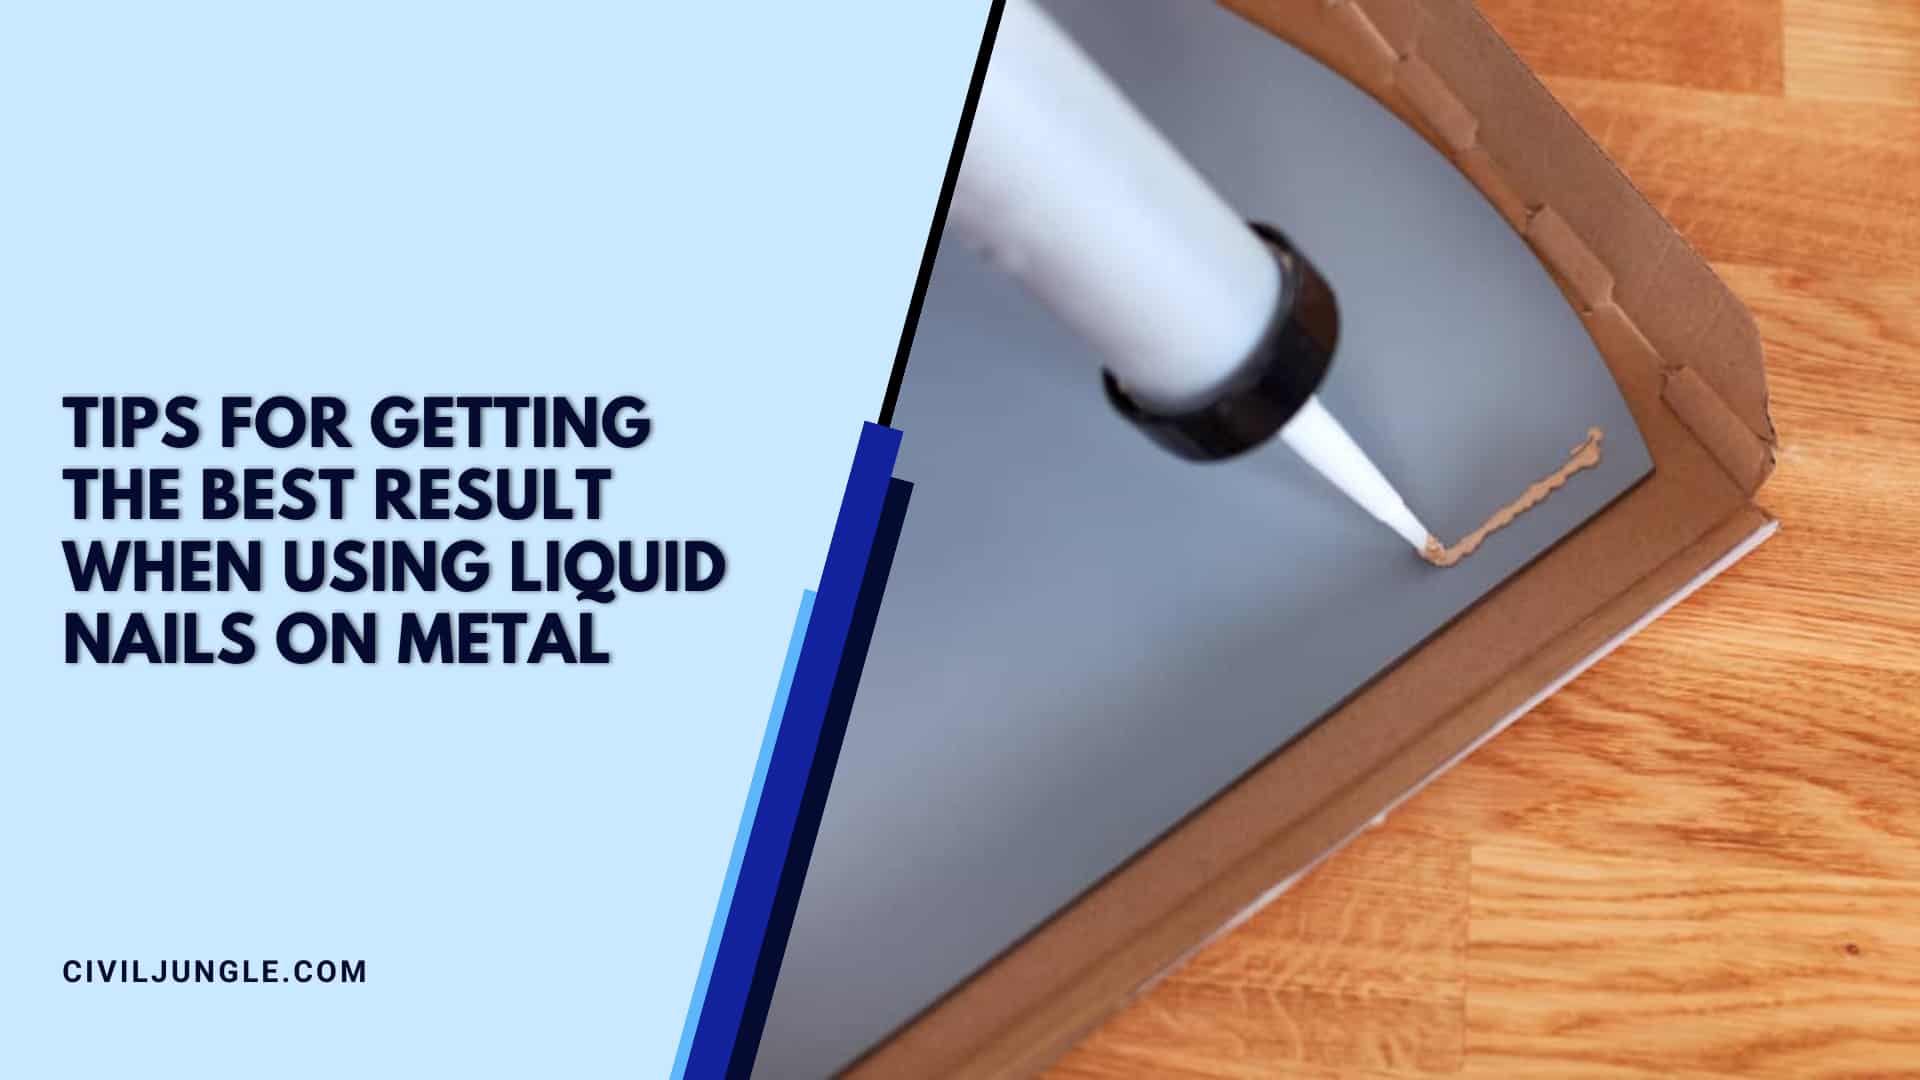 Tips for Getting the Best Result When Using Liquid Nails on Metal